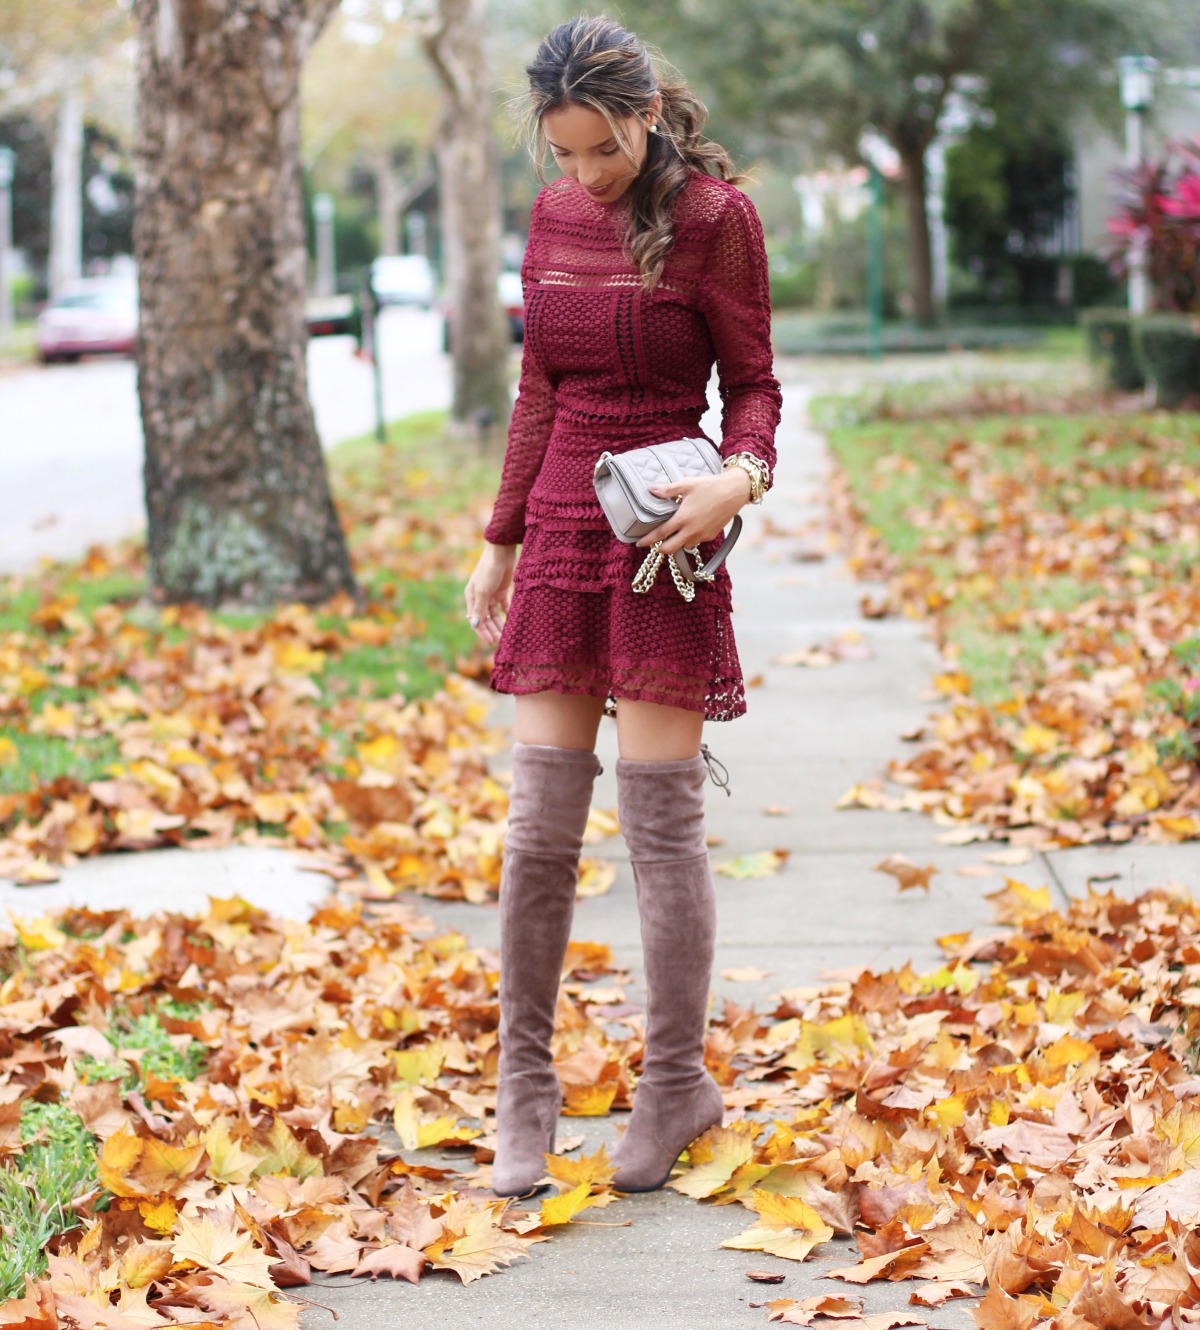 Burgundy lace dress and thigh high boots